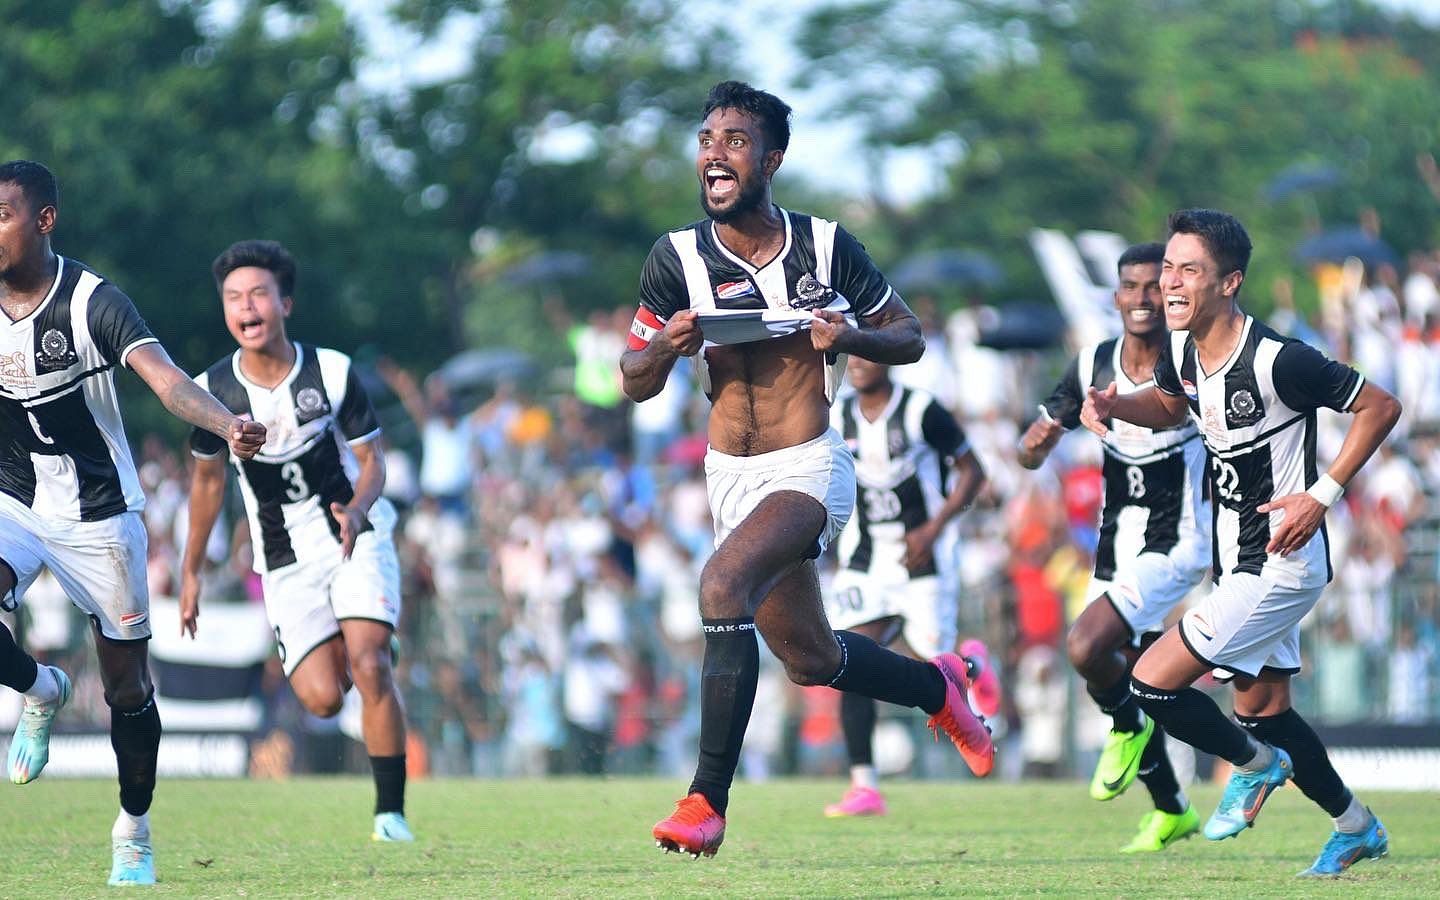 Mohammedan SC will look to return to winning ways against the Indian Navy in the Durand Cup.